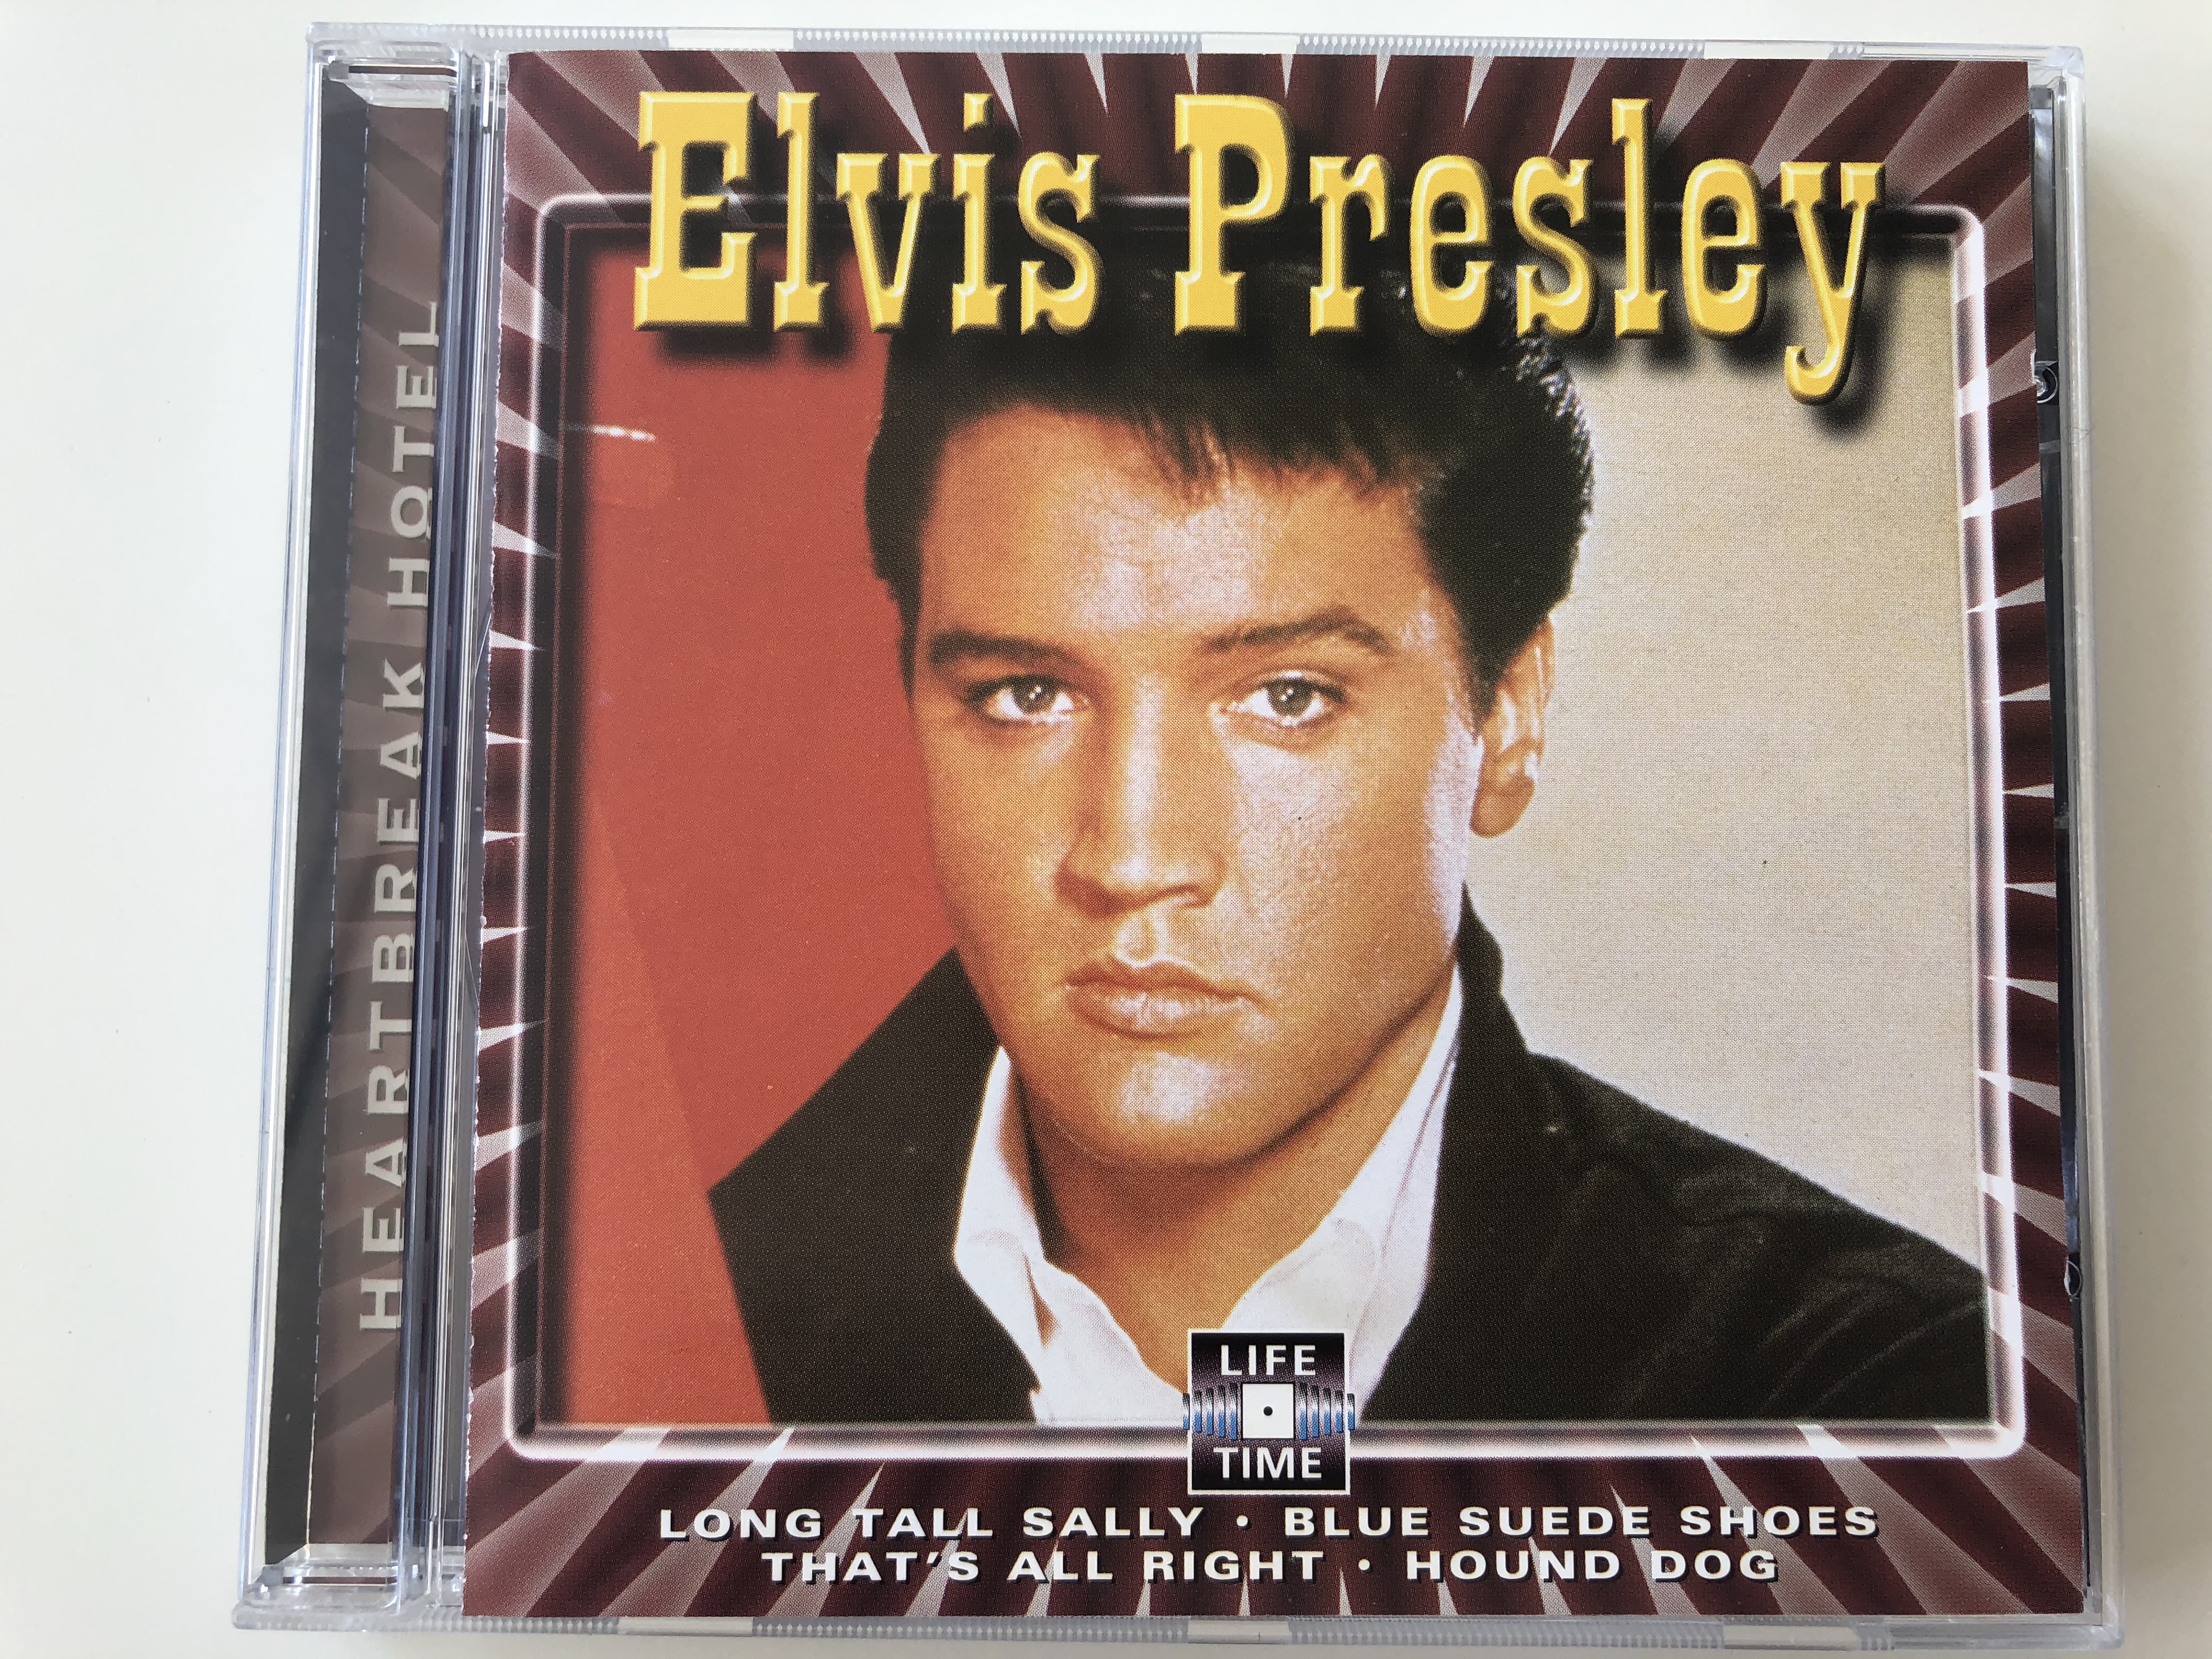 elvis-presley-heartbreak-hotel-long-tall-sally-blue-suede-shoes-that-s-all-right-hound-dog-life-time-audio-cd-lt-5019-1-.jpg